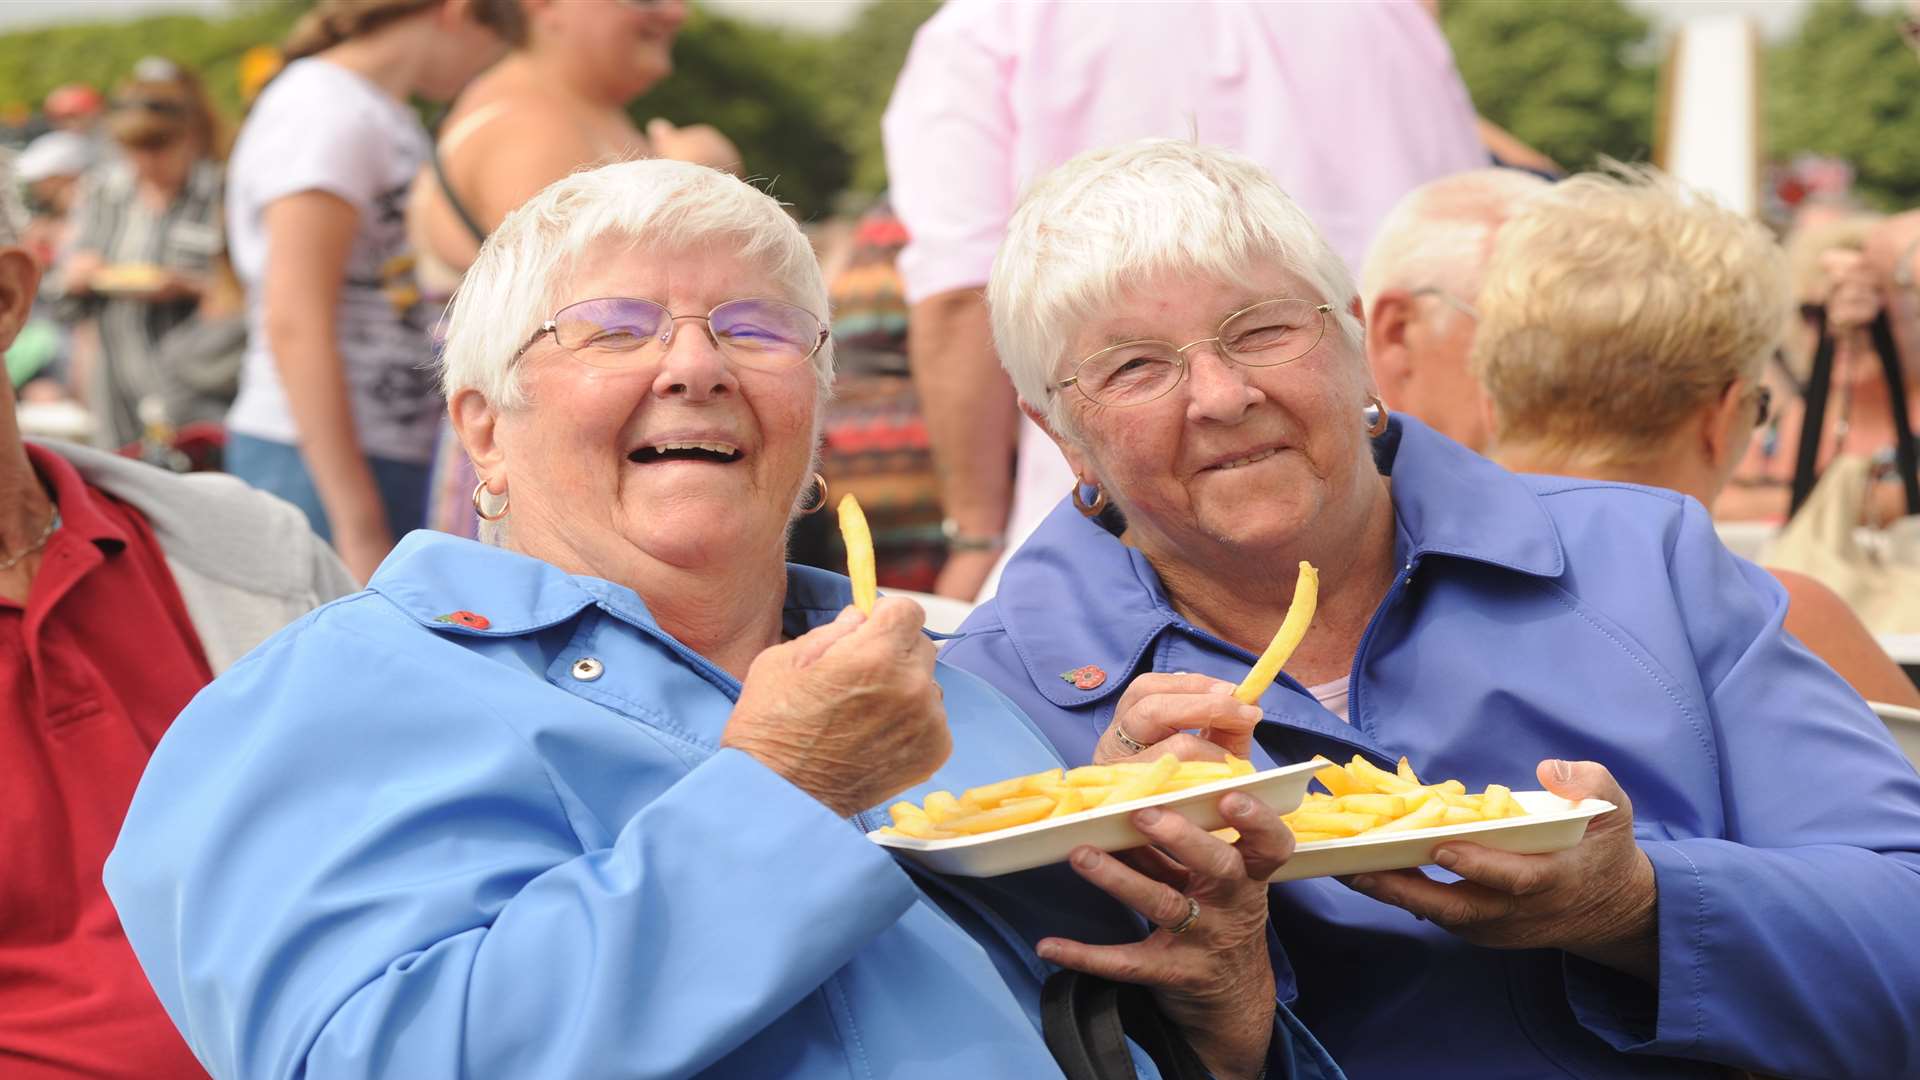 Twins June and May, who celebrated their 81st birthday last week, enjoying the day